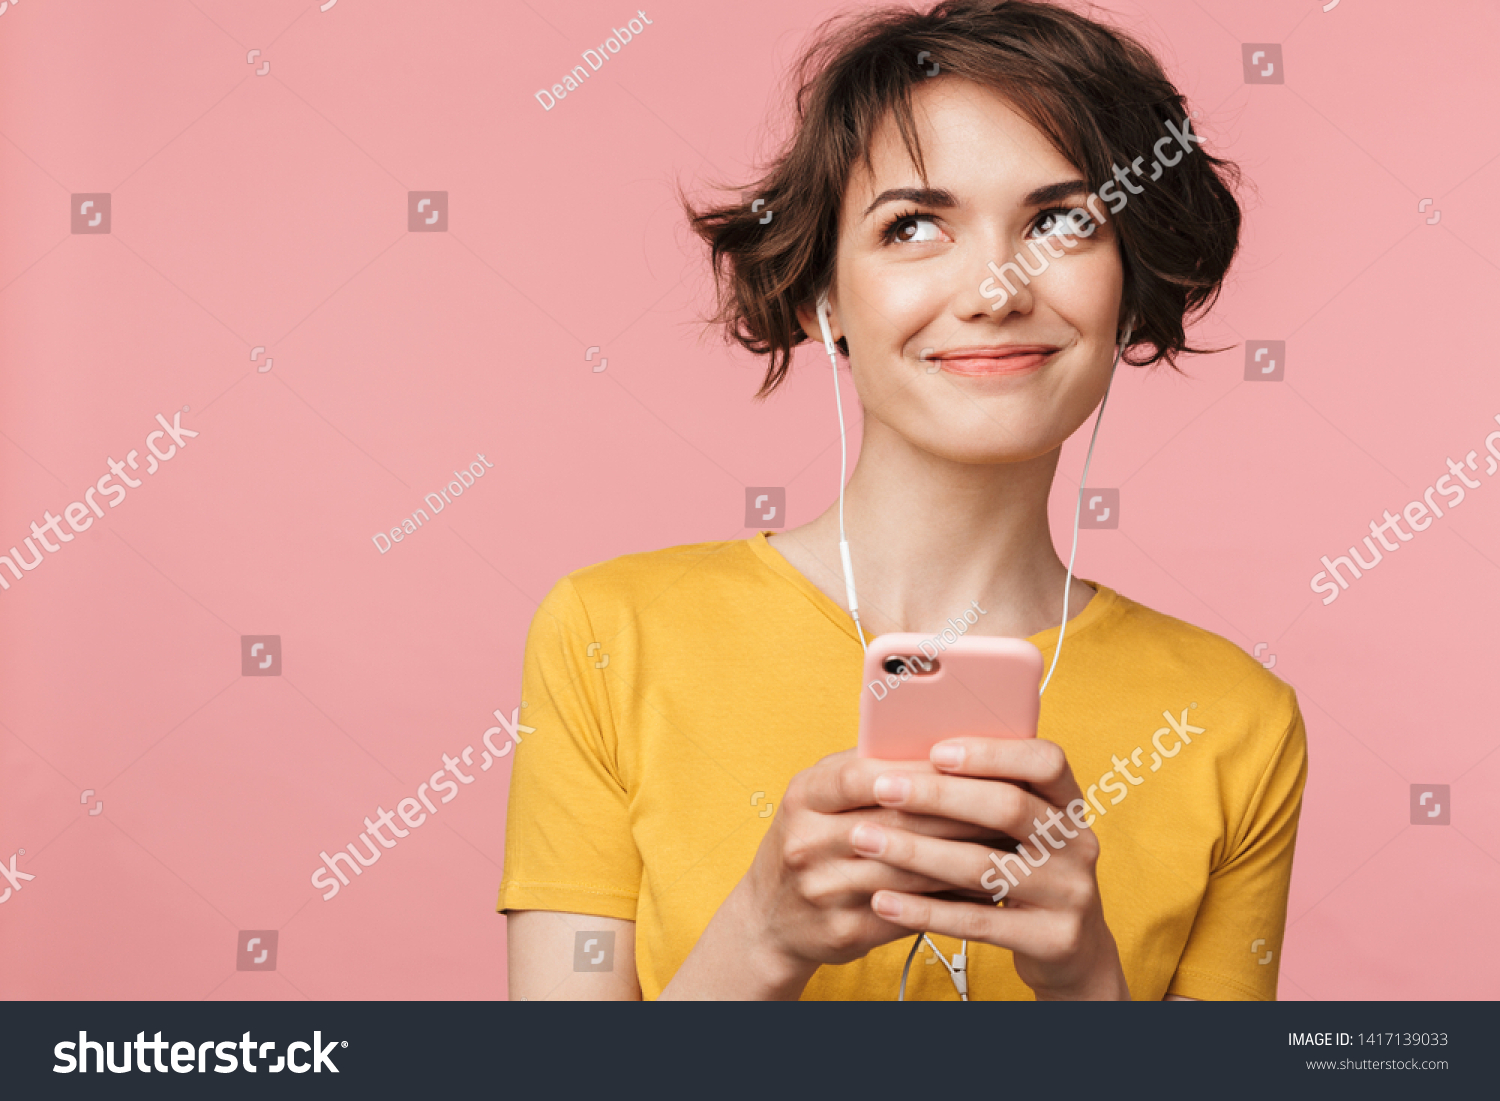 Image of a happy young beautiful woman posing isolated over pink wall background listening music with earphones using mobile phone. #1417139033